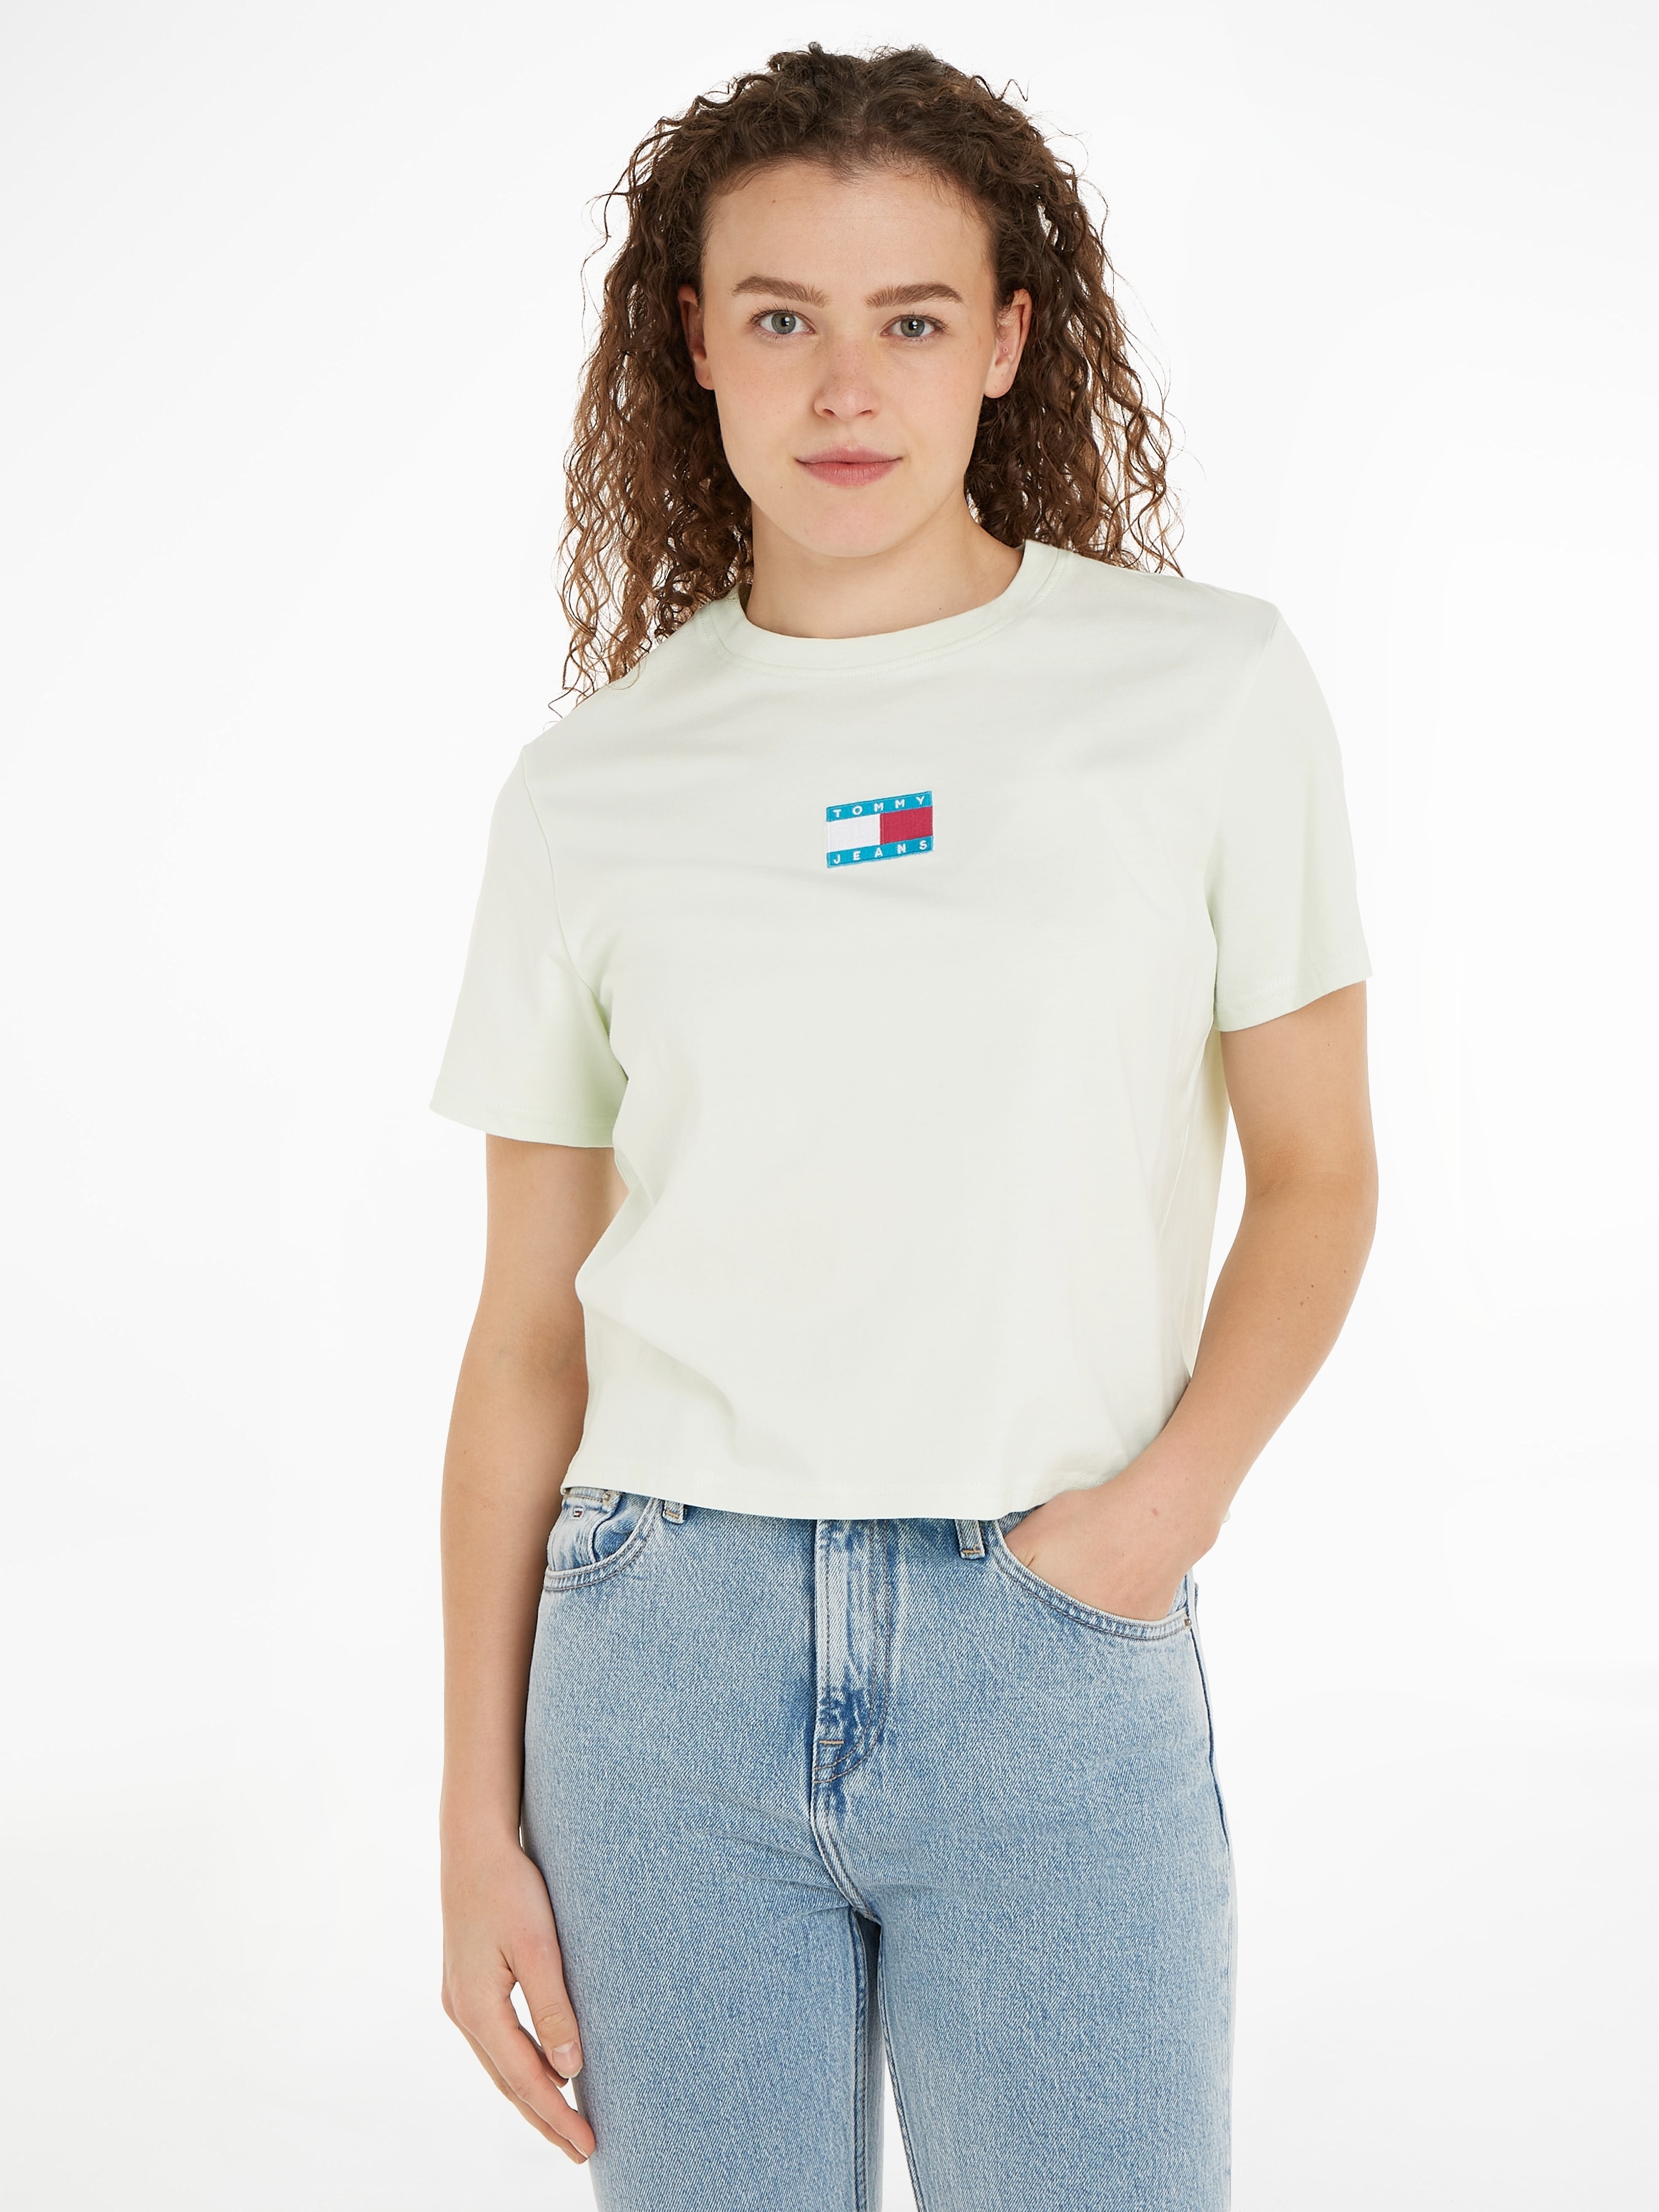 Tommy Jeans T-Shirt mit walking Jeans kaufen BADGE »TJW POP Logostickerei Tommy I\'m | CLS TEE«